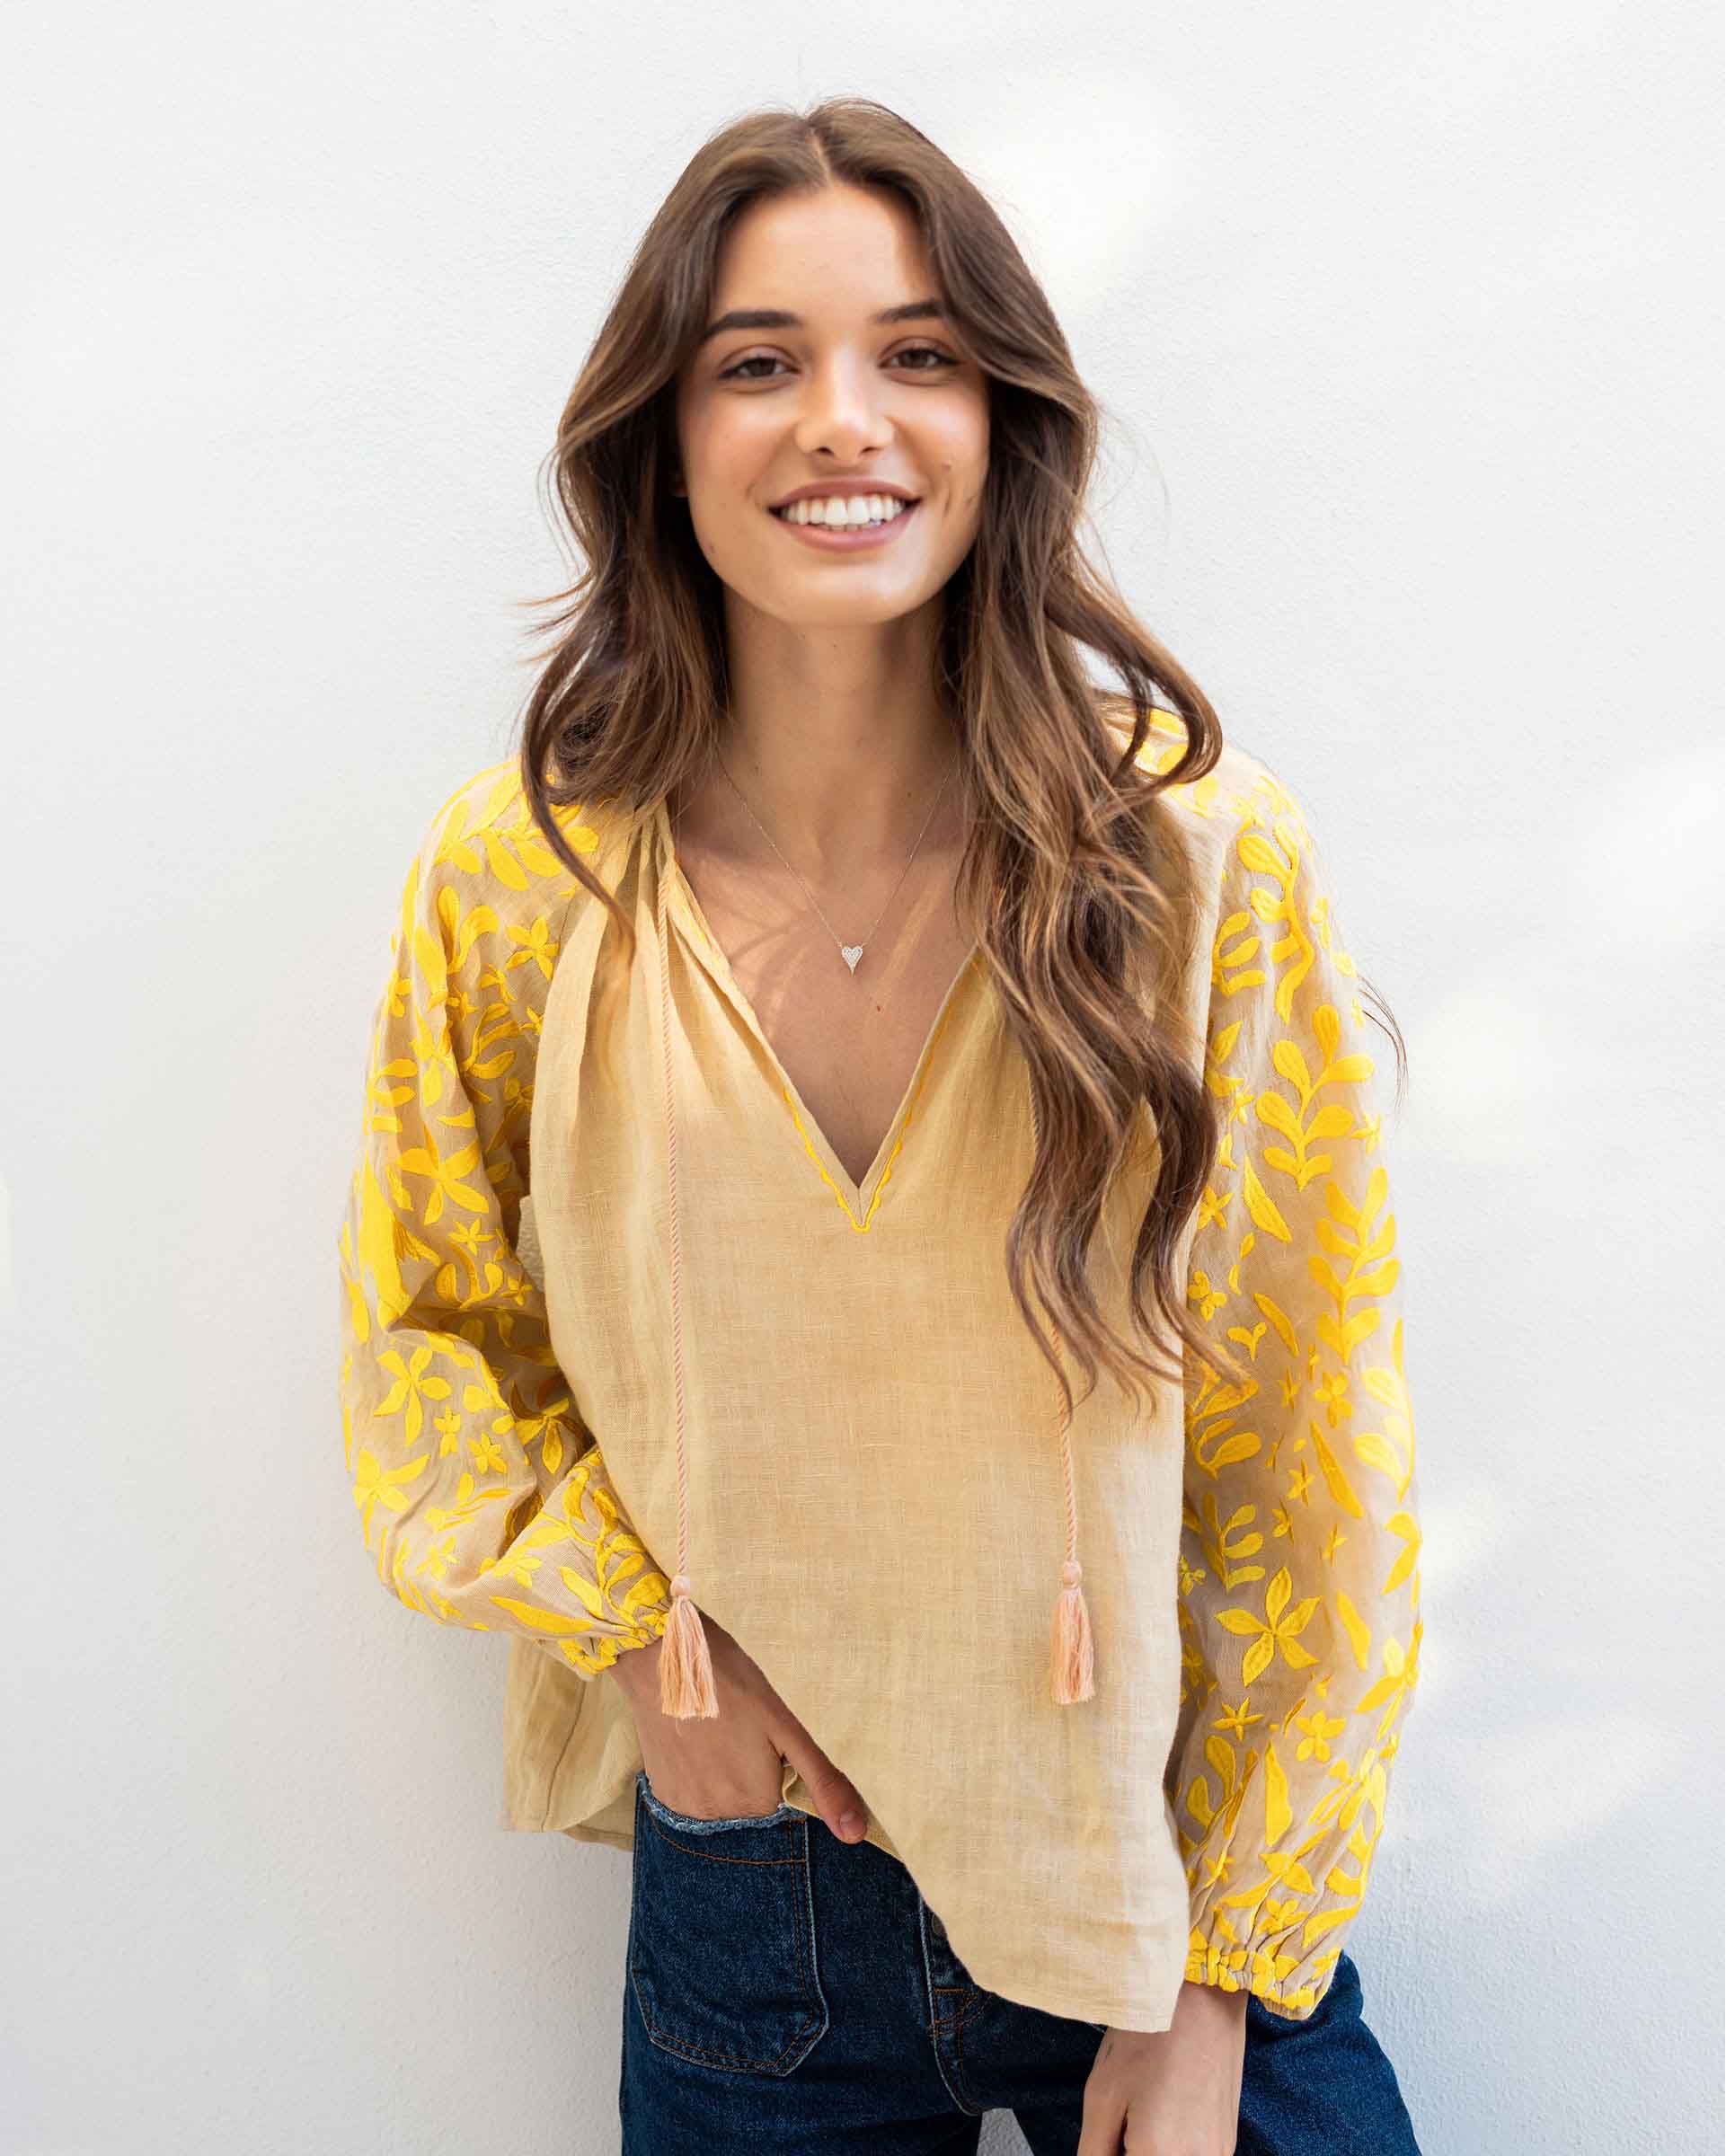 female wearing tan and yellow embroidered blouse with v-neckline standing in front of a white wall